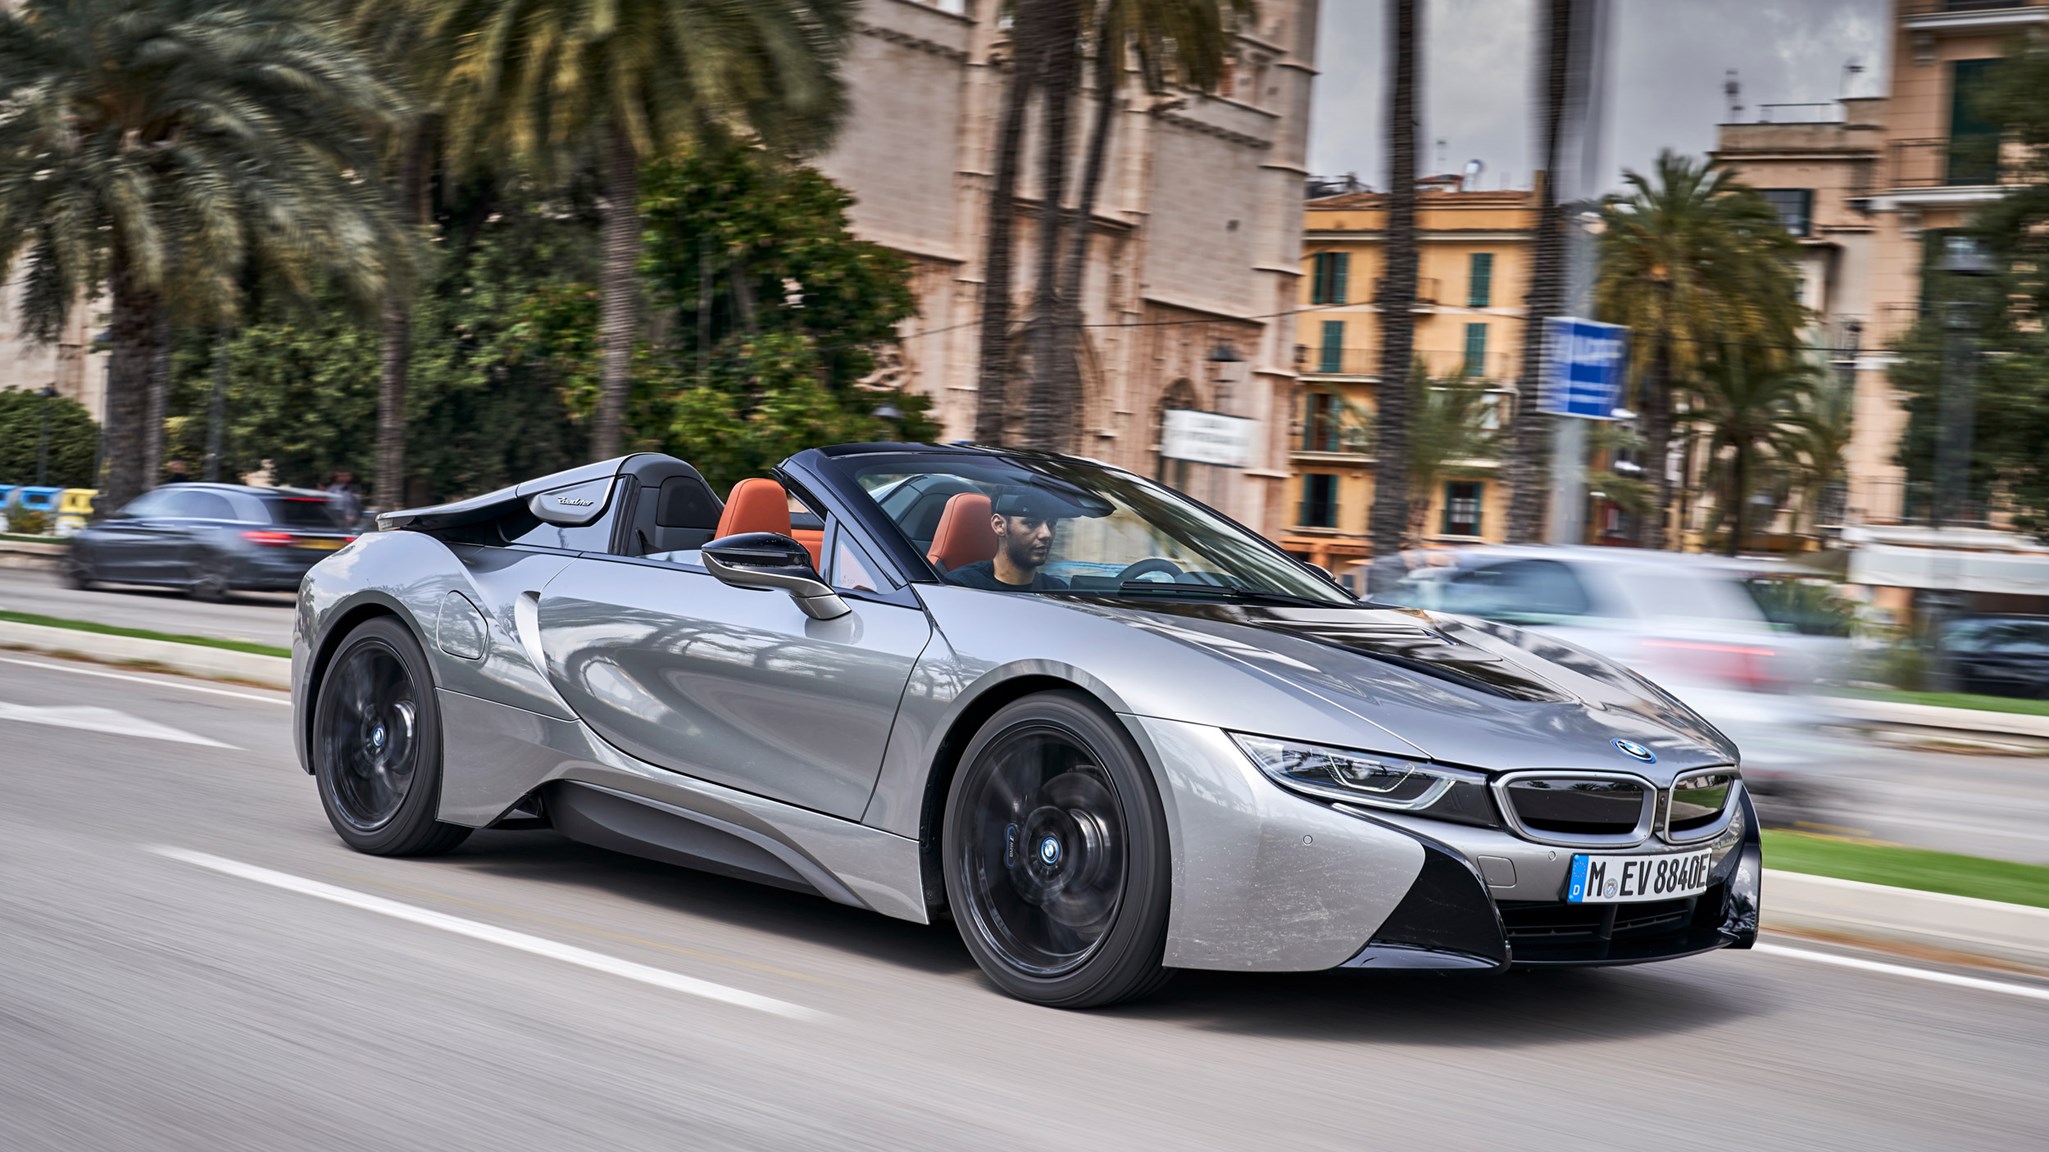 BMW i8 Roadster review: the hybrid supercar, refined